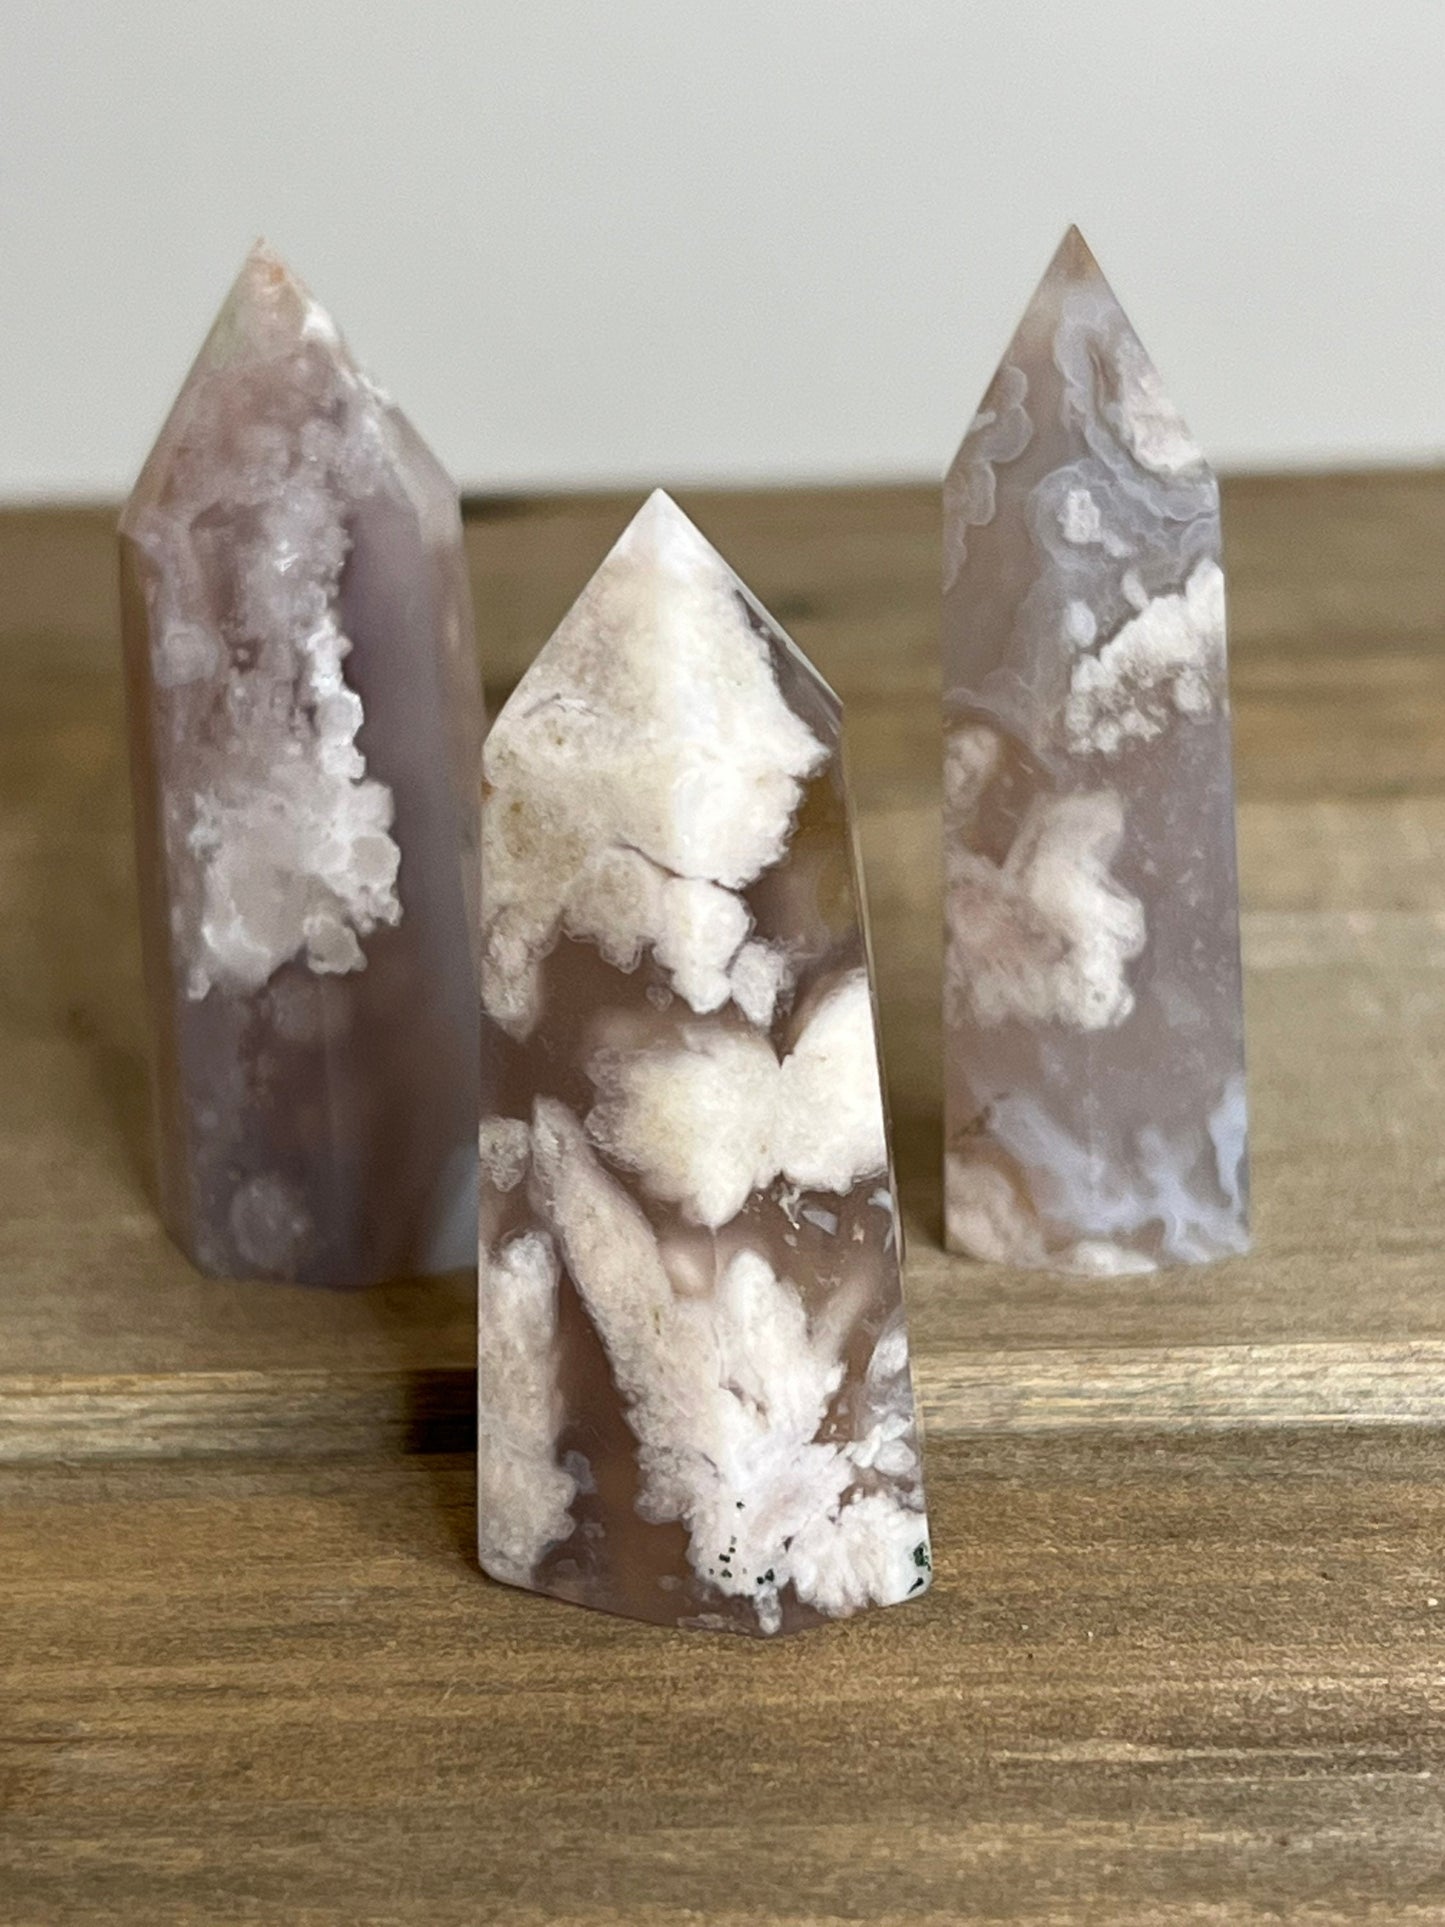 Small Dark Flower Agate Tower - Cherry Blossom Agate Tower